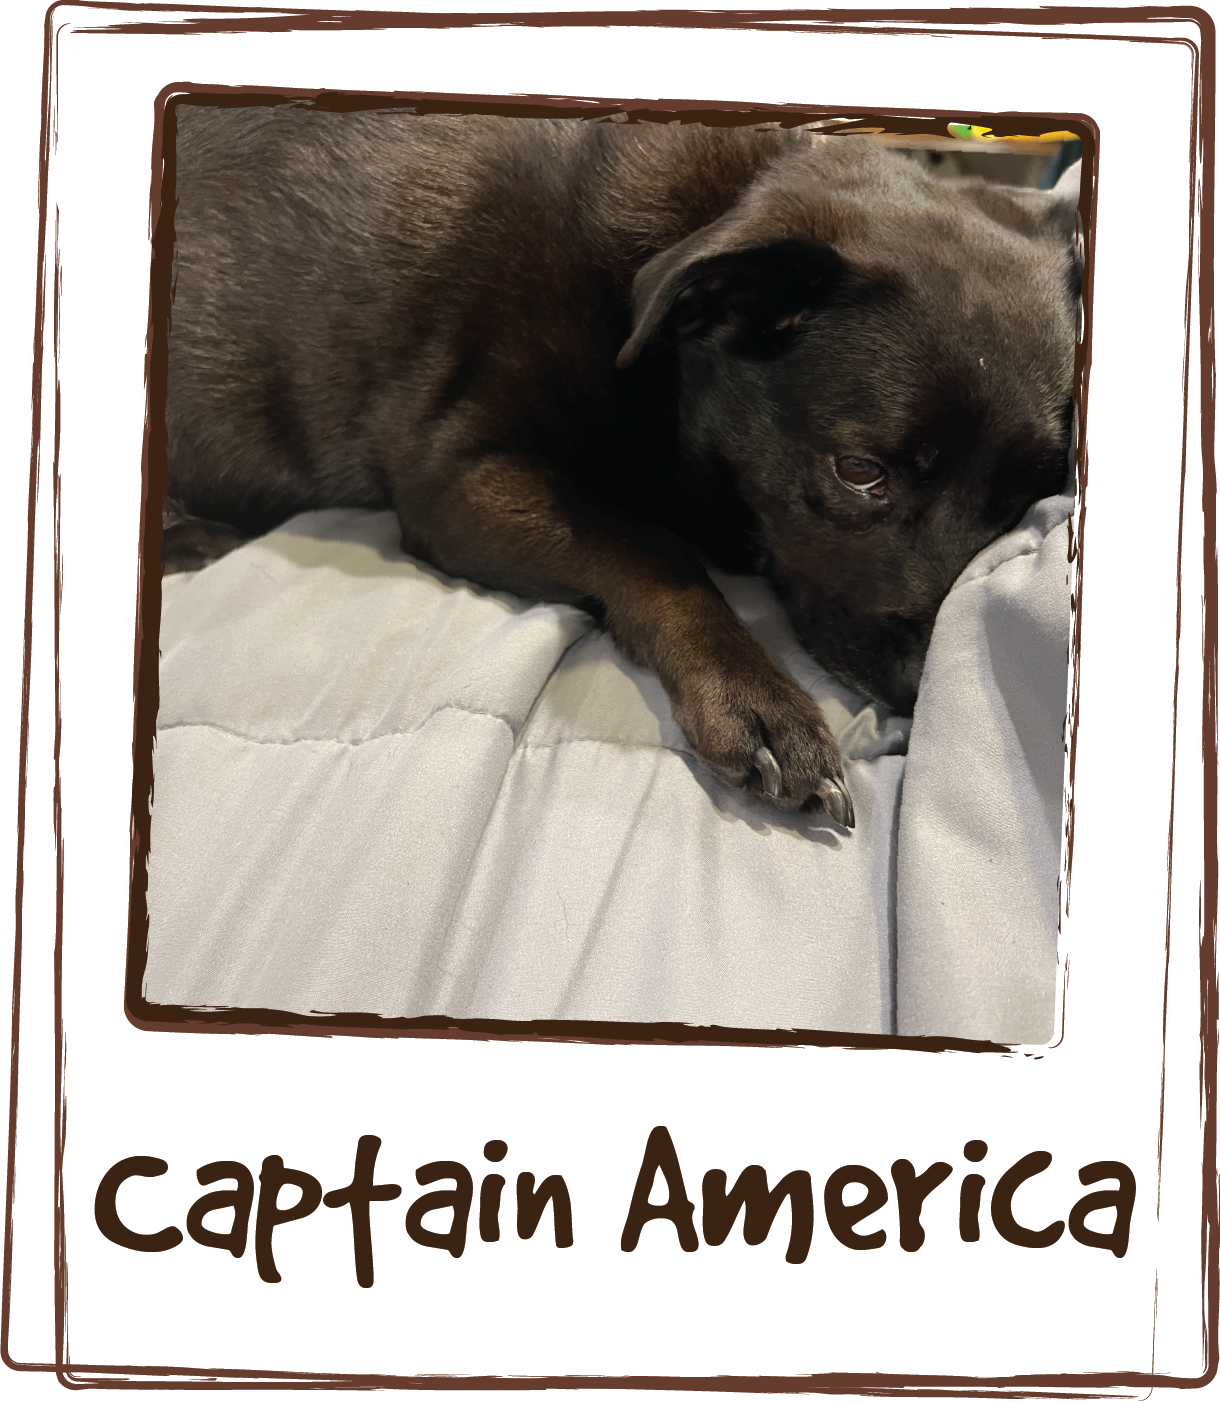  “My dog Captain America suffers from storm anxiety. His whole body shakes and he's pants so much. It was so hard to watch and not be about to provide any comfort. We found Lick's when he was about 3 (he’s 8 now) and it's a staple in our home. We liv